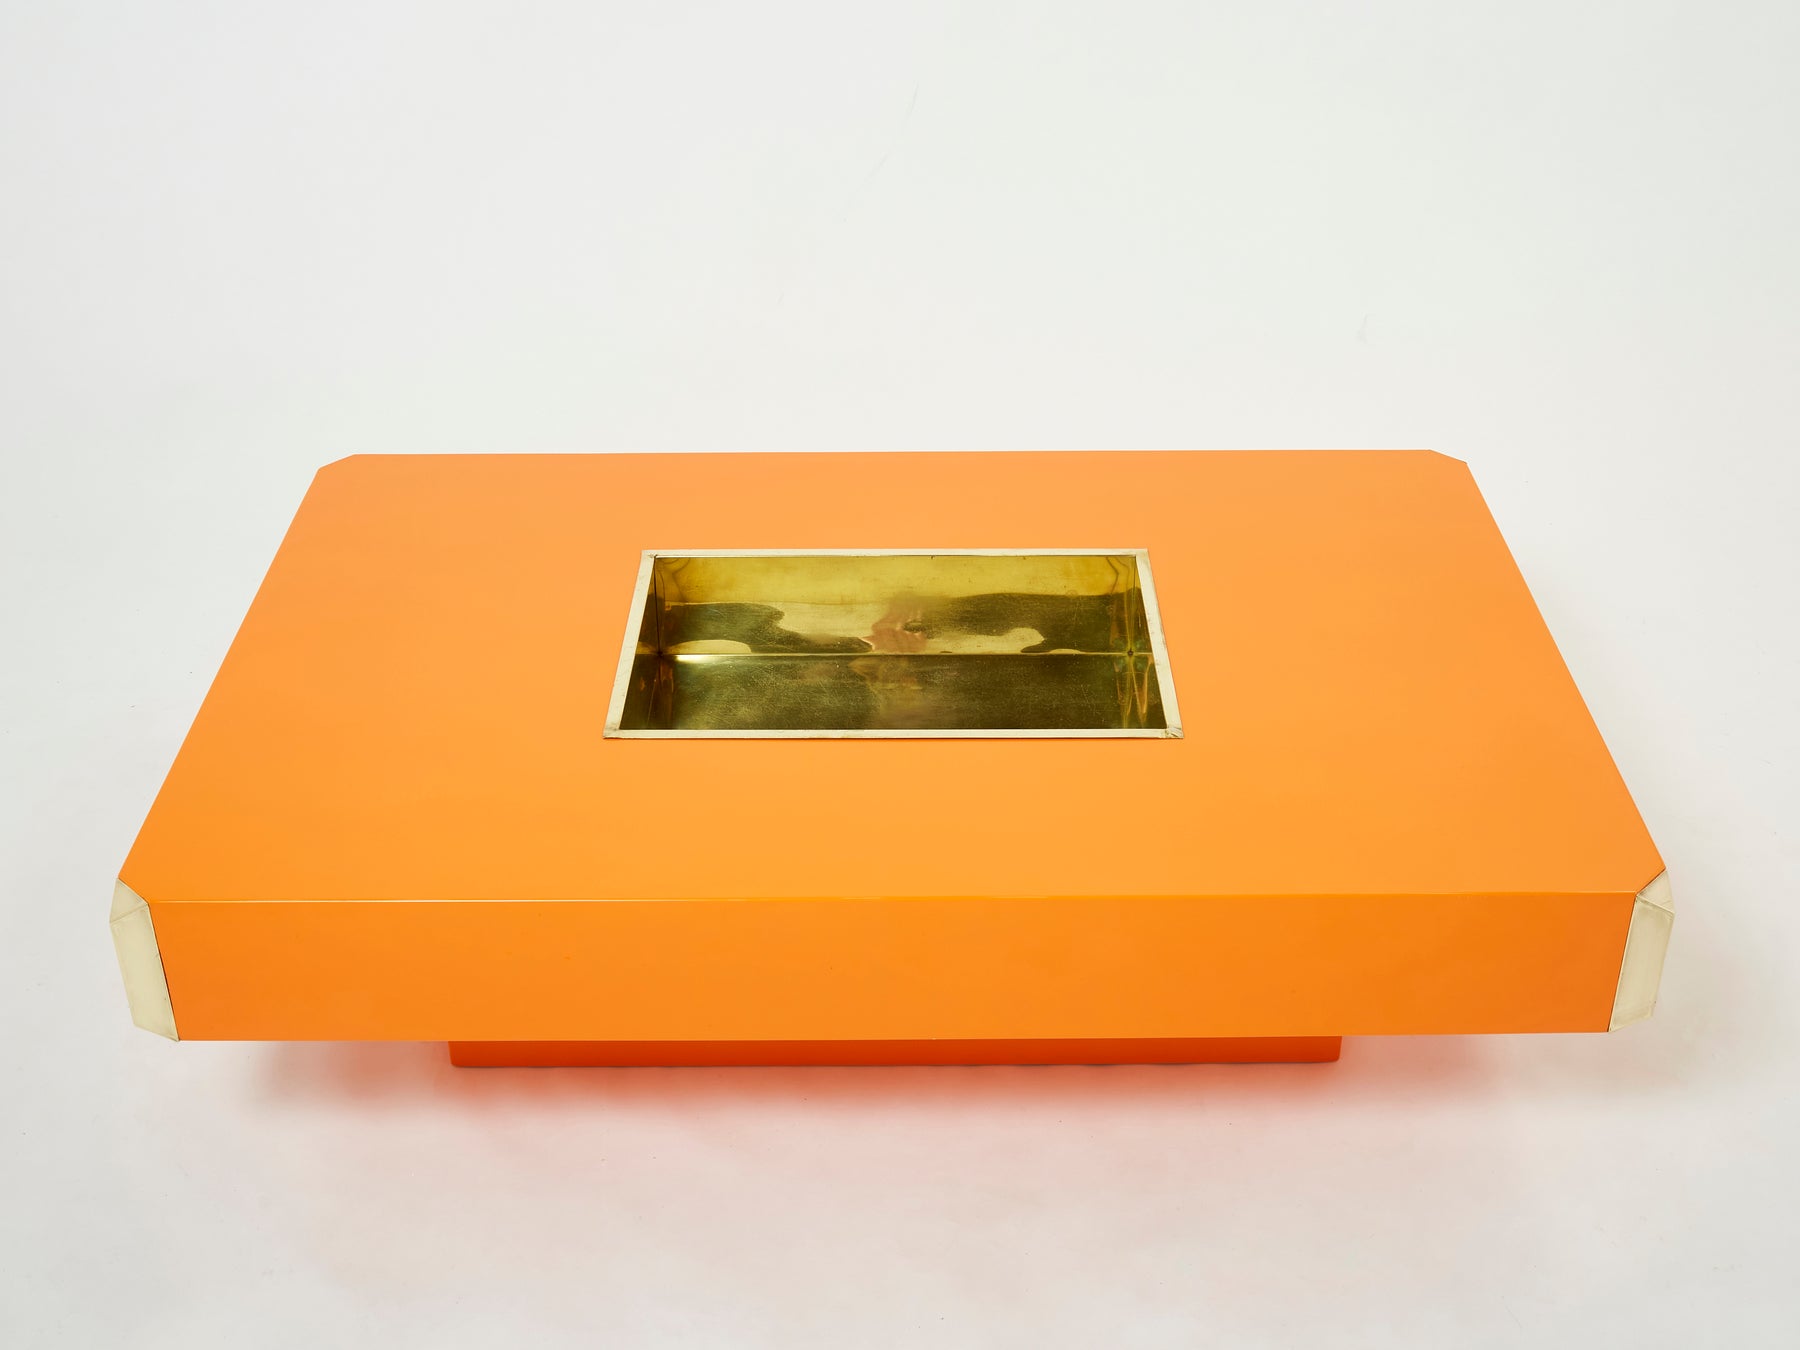 Willy Rizzo orange lacquer and brass bar coffee table Alveo 1970s